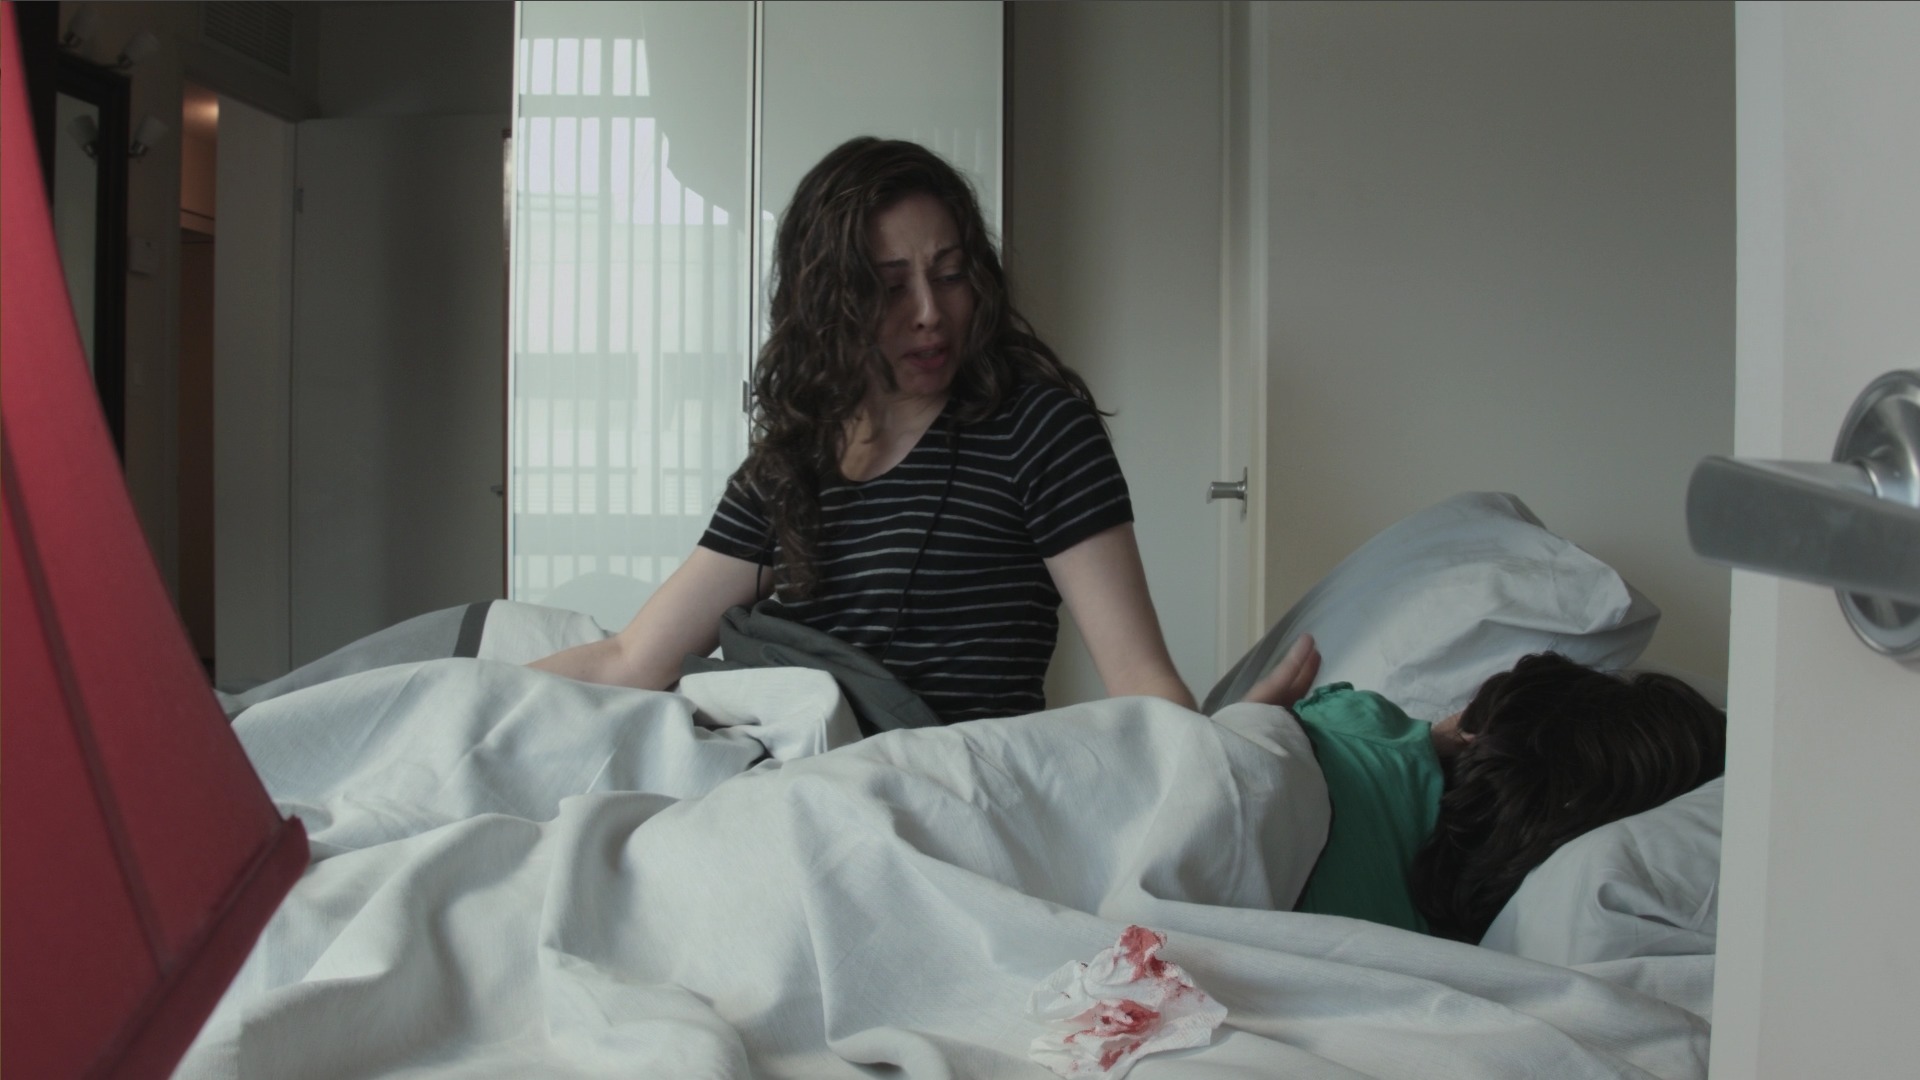 Film still from LUCIFEROUS with Mahsa Ghorbankarimi and Mina Gorelick. (2015)